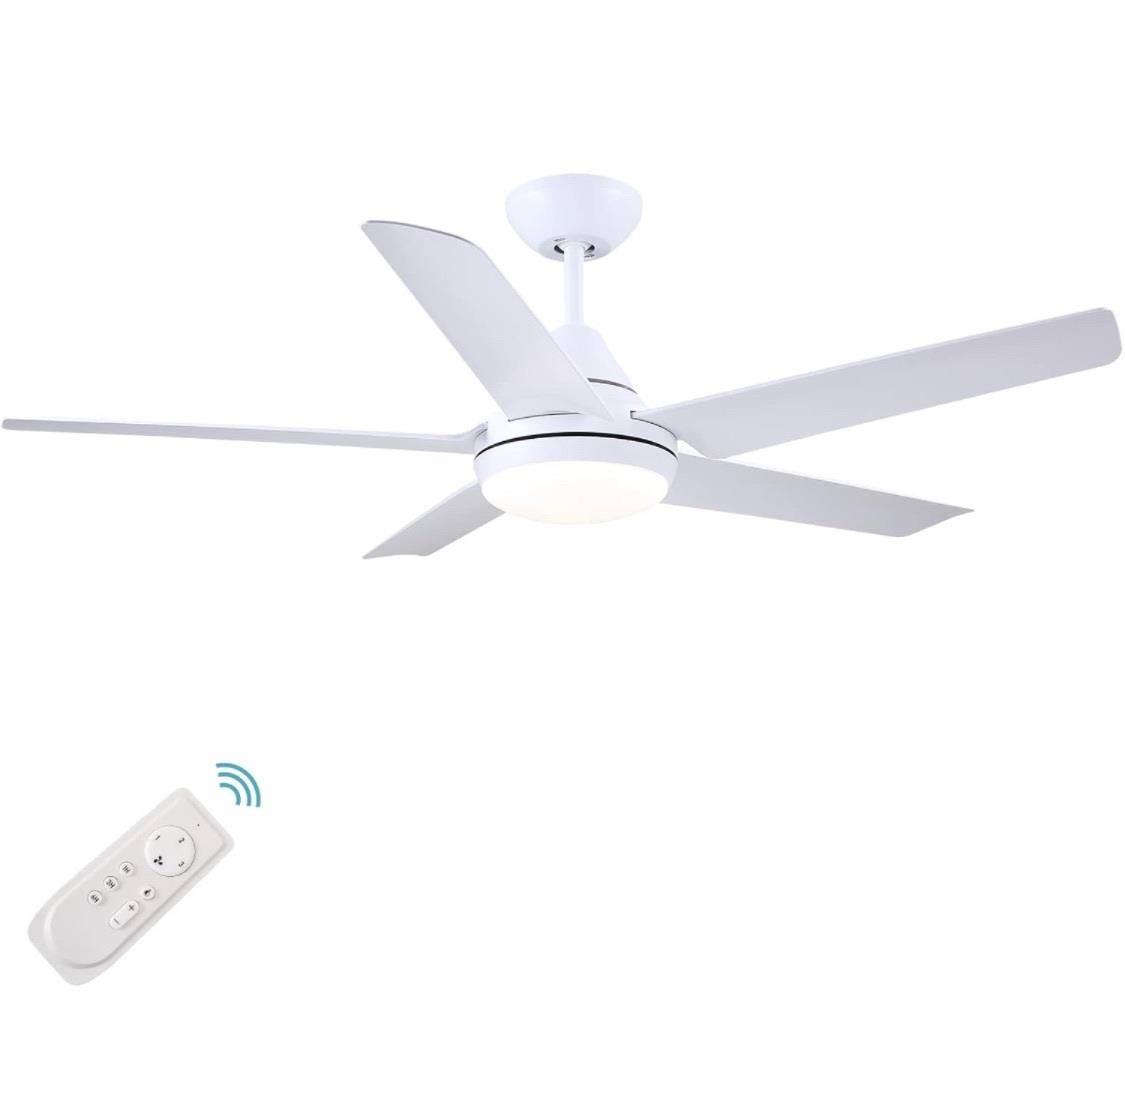 $100 YUHAO 48 inch White Ceiling Fan with Light